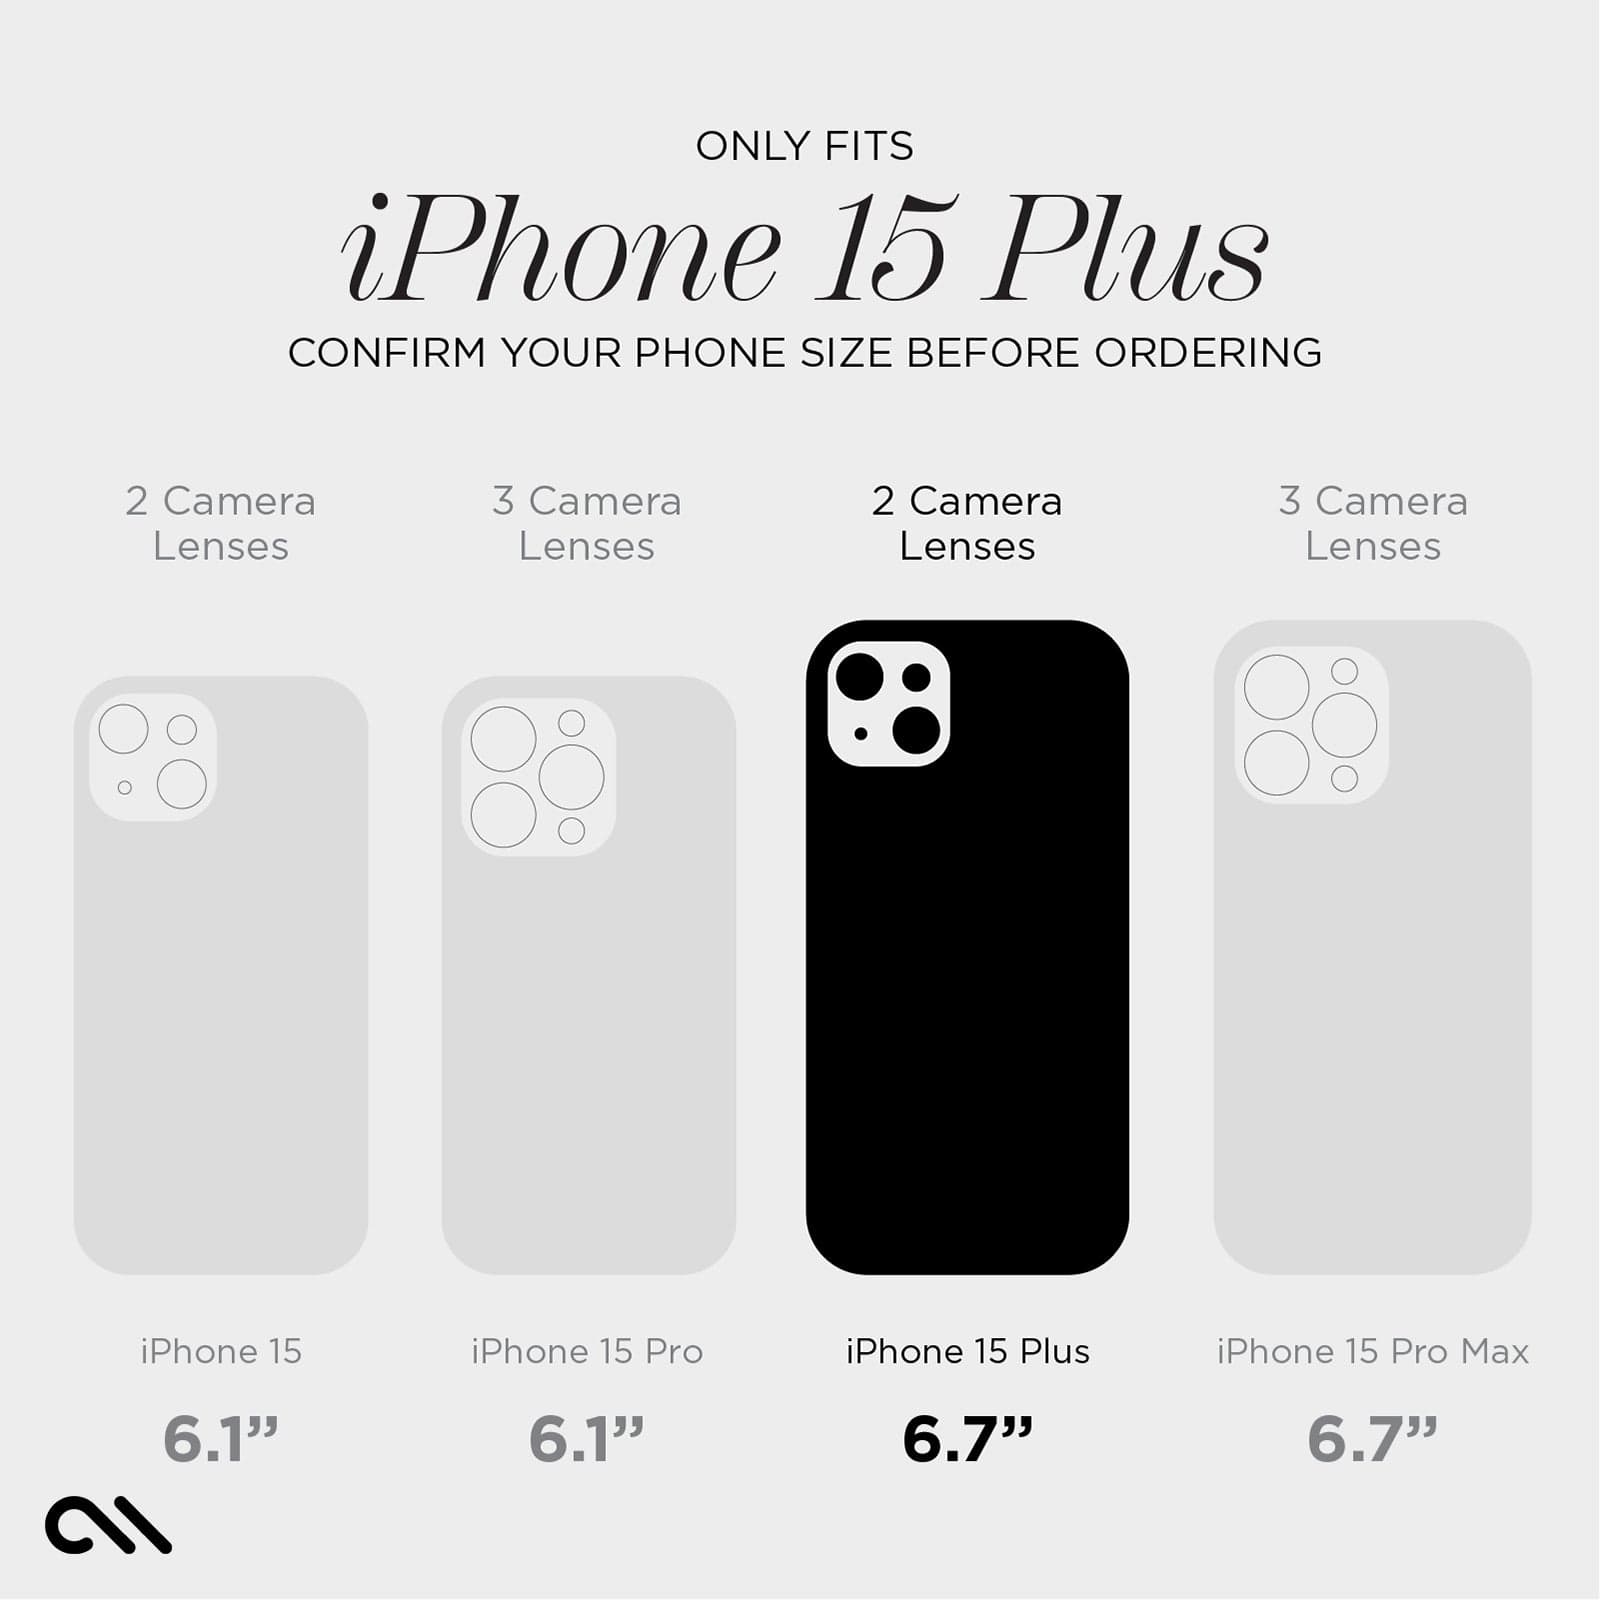 Only fits iPhone 15 Plus. Confirm your device size before ordering